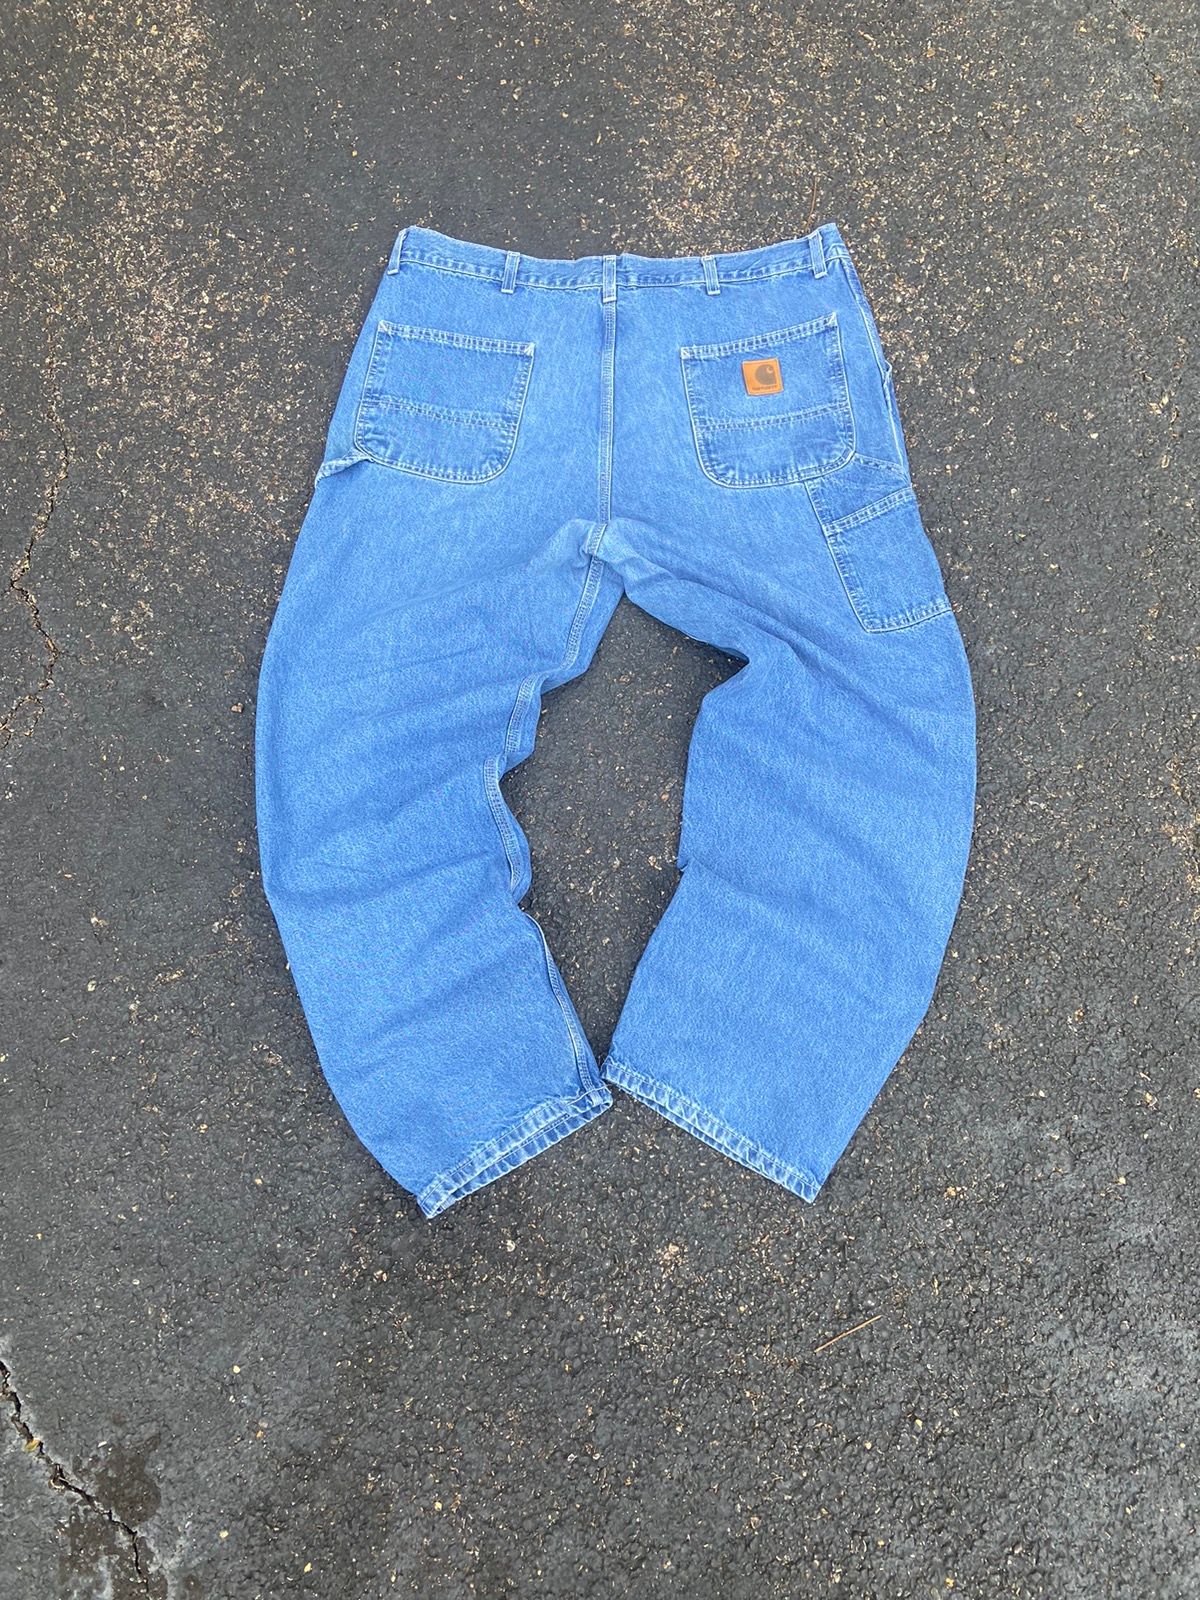 Pre-owned Carhartt X Vintage Crazy Vintage Baggy 90's Faded Carhartt Blue Jeans 42x32 Usa